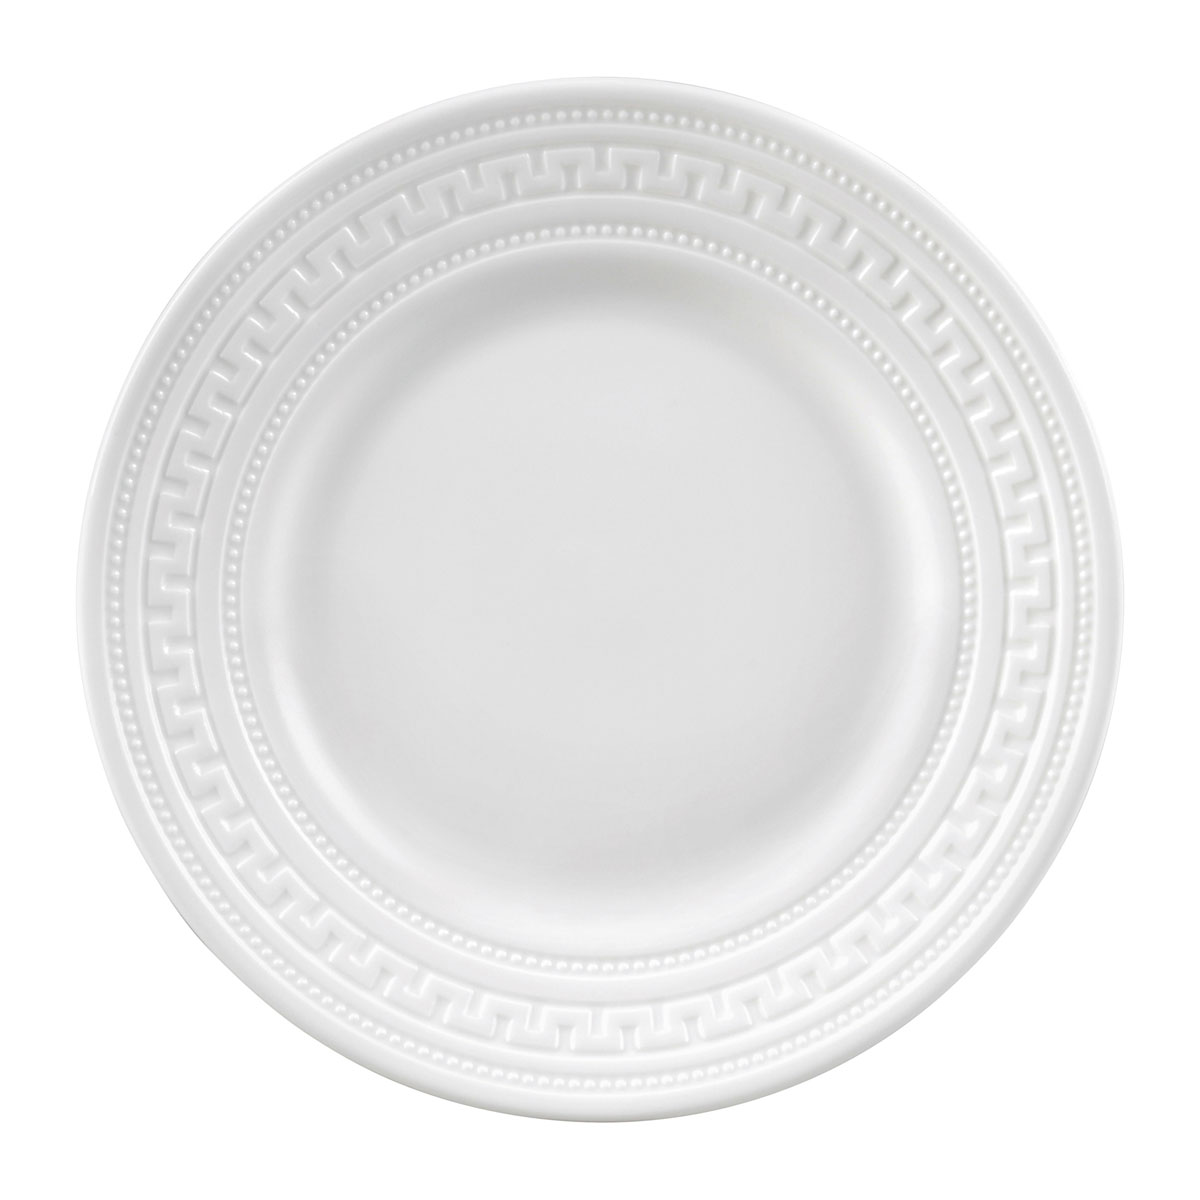 Wedgwood Intaglio Bread and Butter Plate, Single